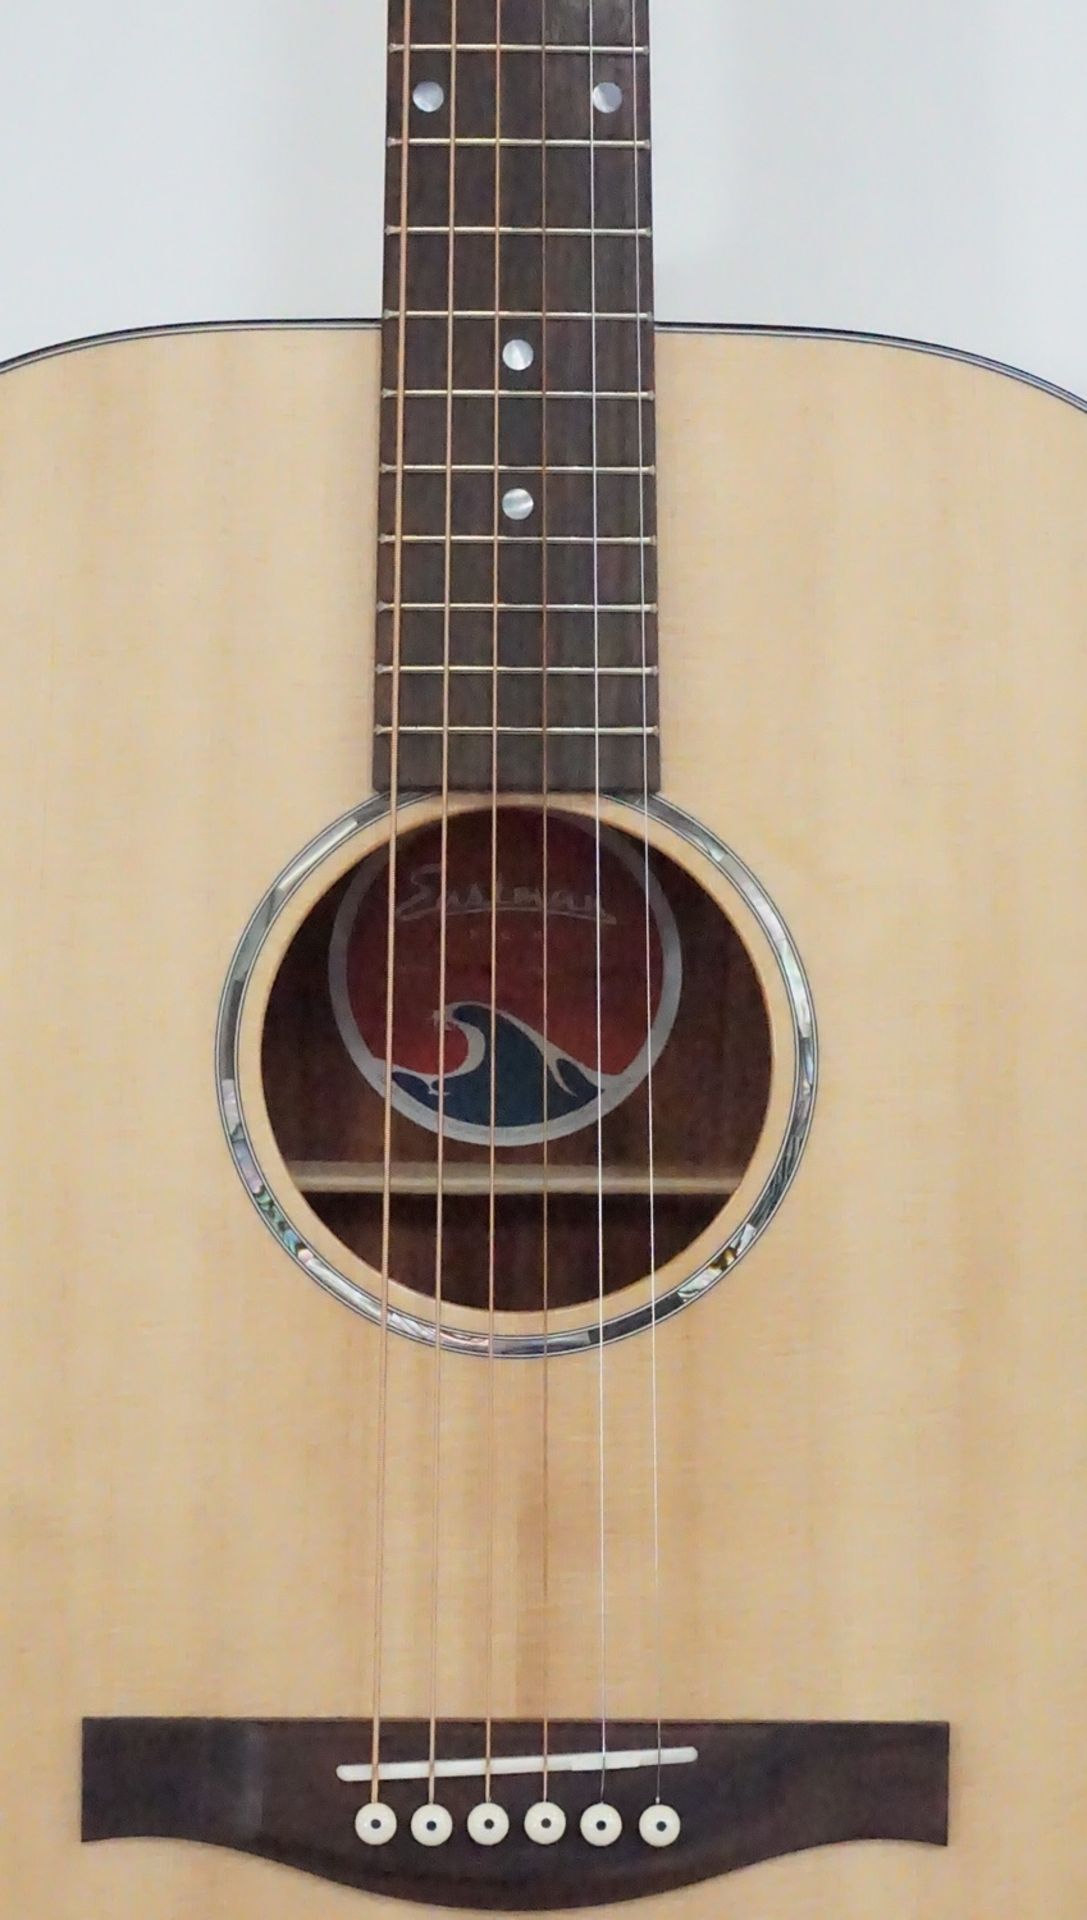 EASTMAN PCH1-0M MAHOGANY (ORCHESTRA MODEL) SOLID TIP ACOUSTIC GUITAR W/ BLACK HARDSHELL CASE - Image 2 of 4